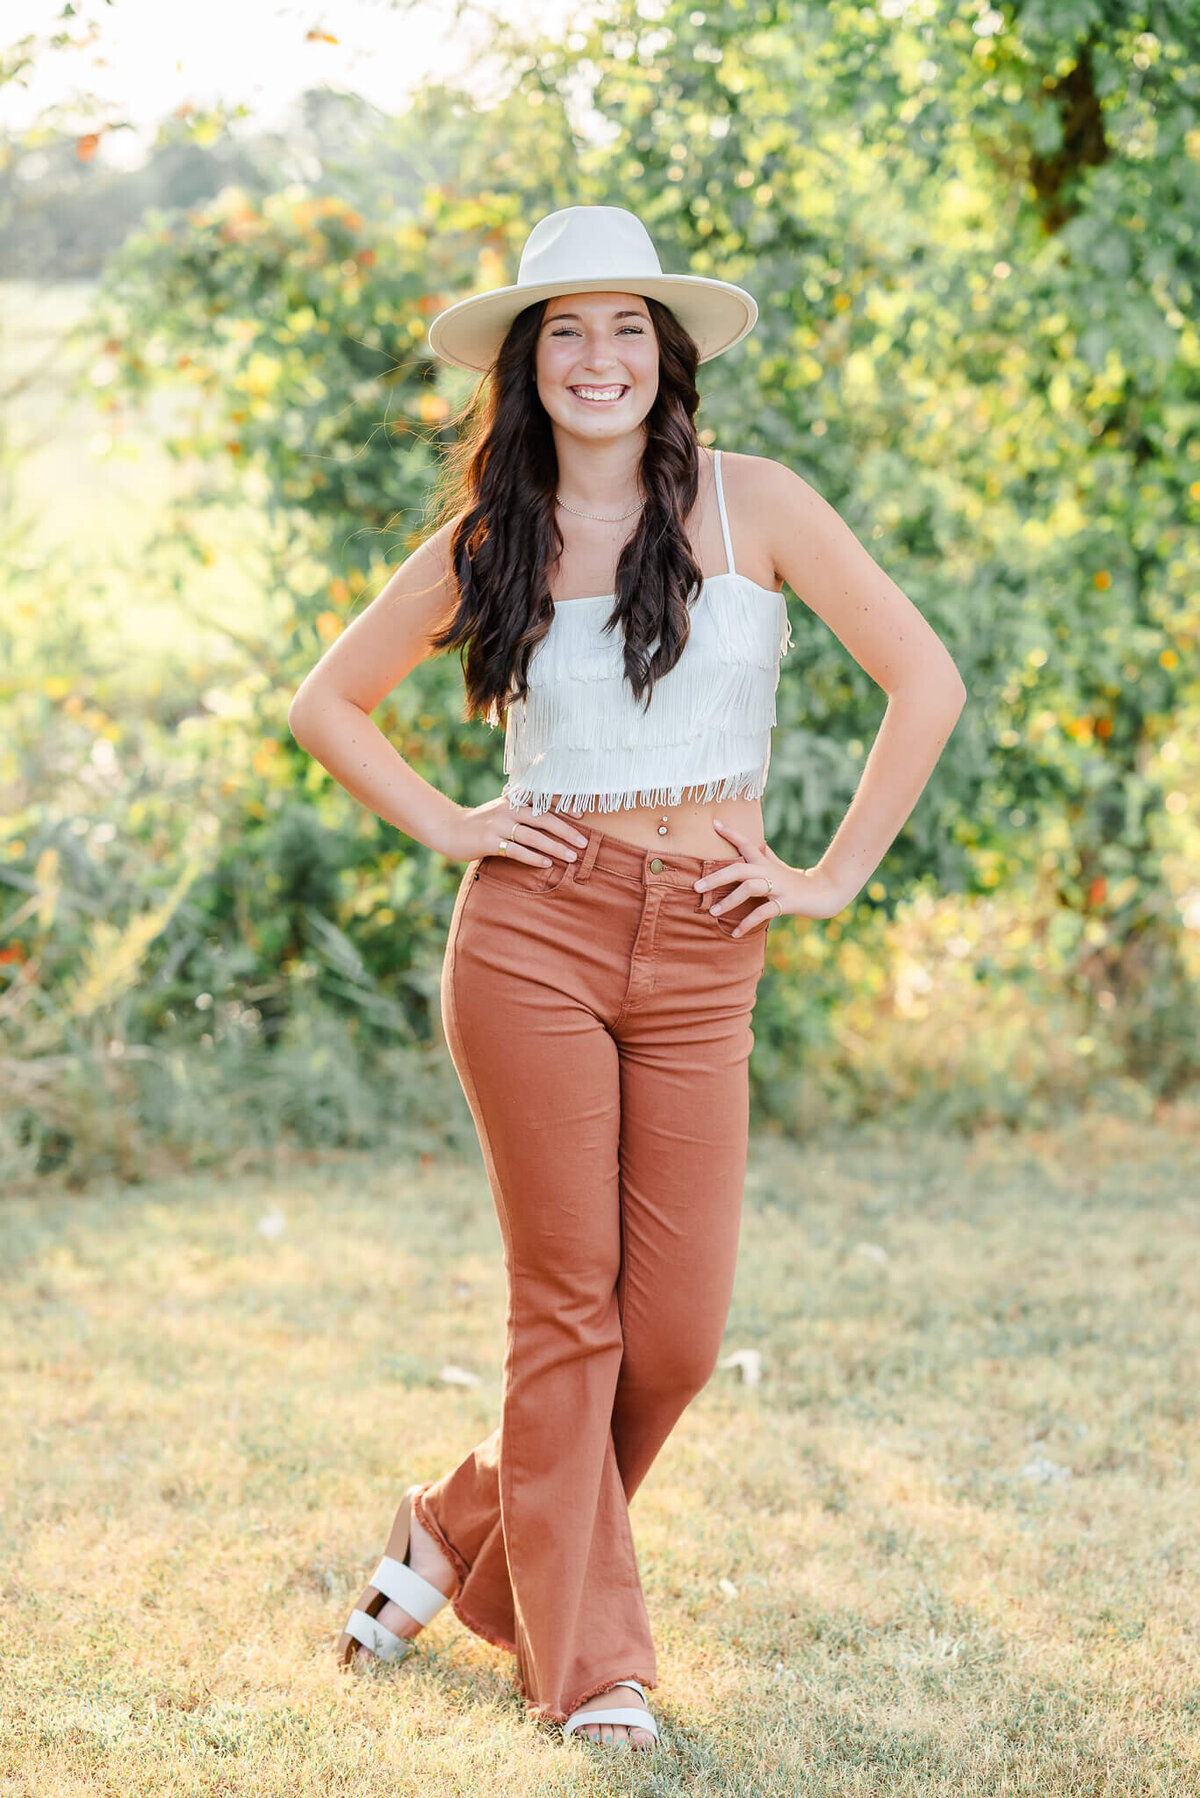 A high school senior, wearing orange pants, a fringe top, and white hat poses with her hands on her hips and a big smile on her face. The sun peeks through some bushes behind her. Photo by Justine Renee Photography at Bells Mill Park in Chesapeake, Virginia.